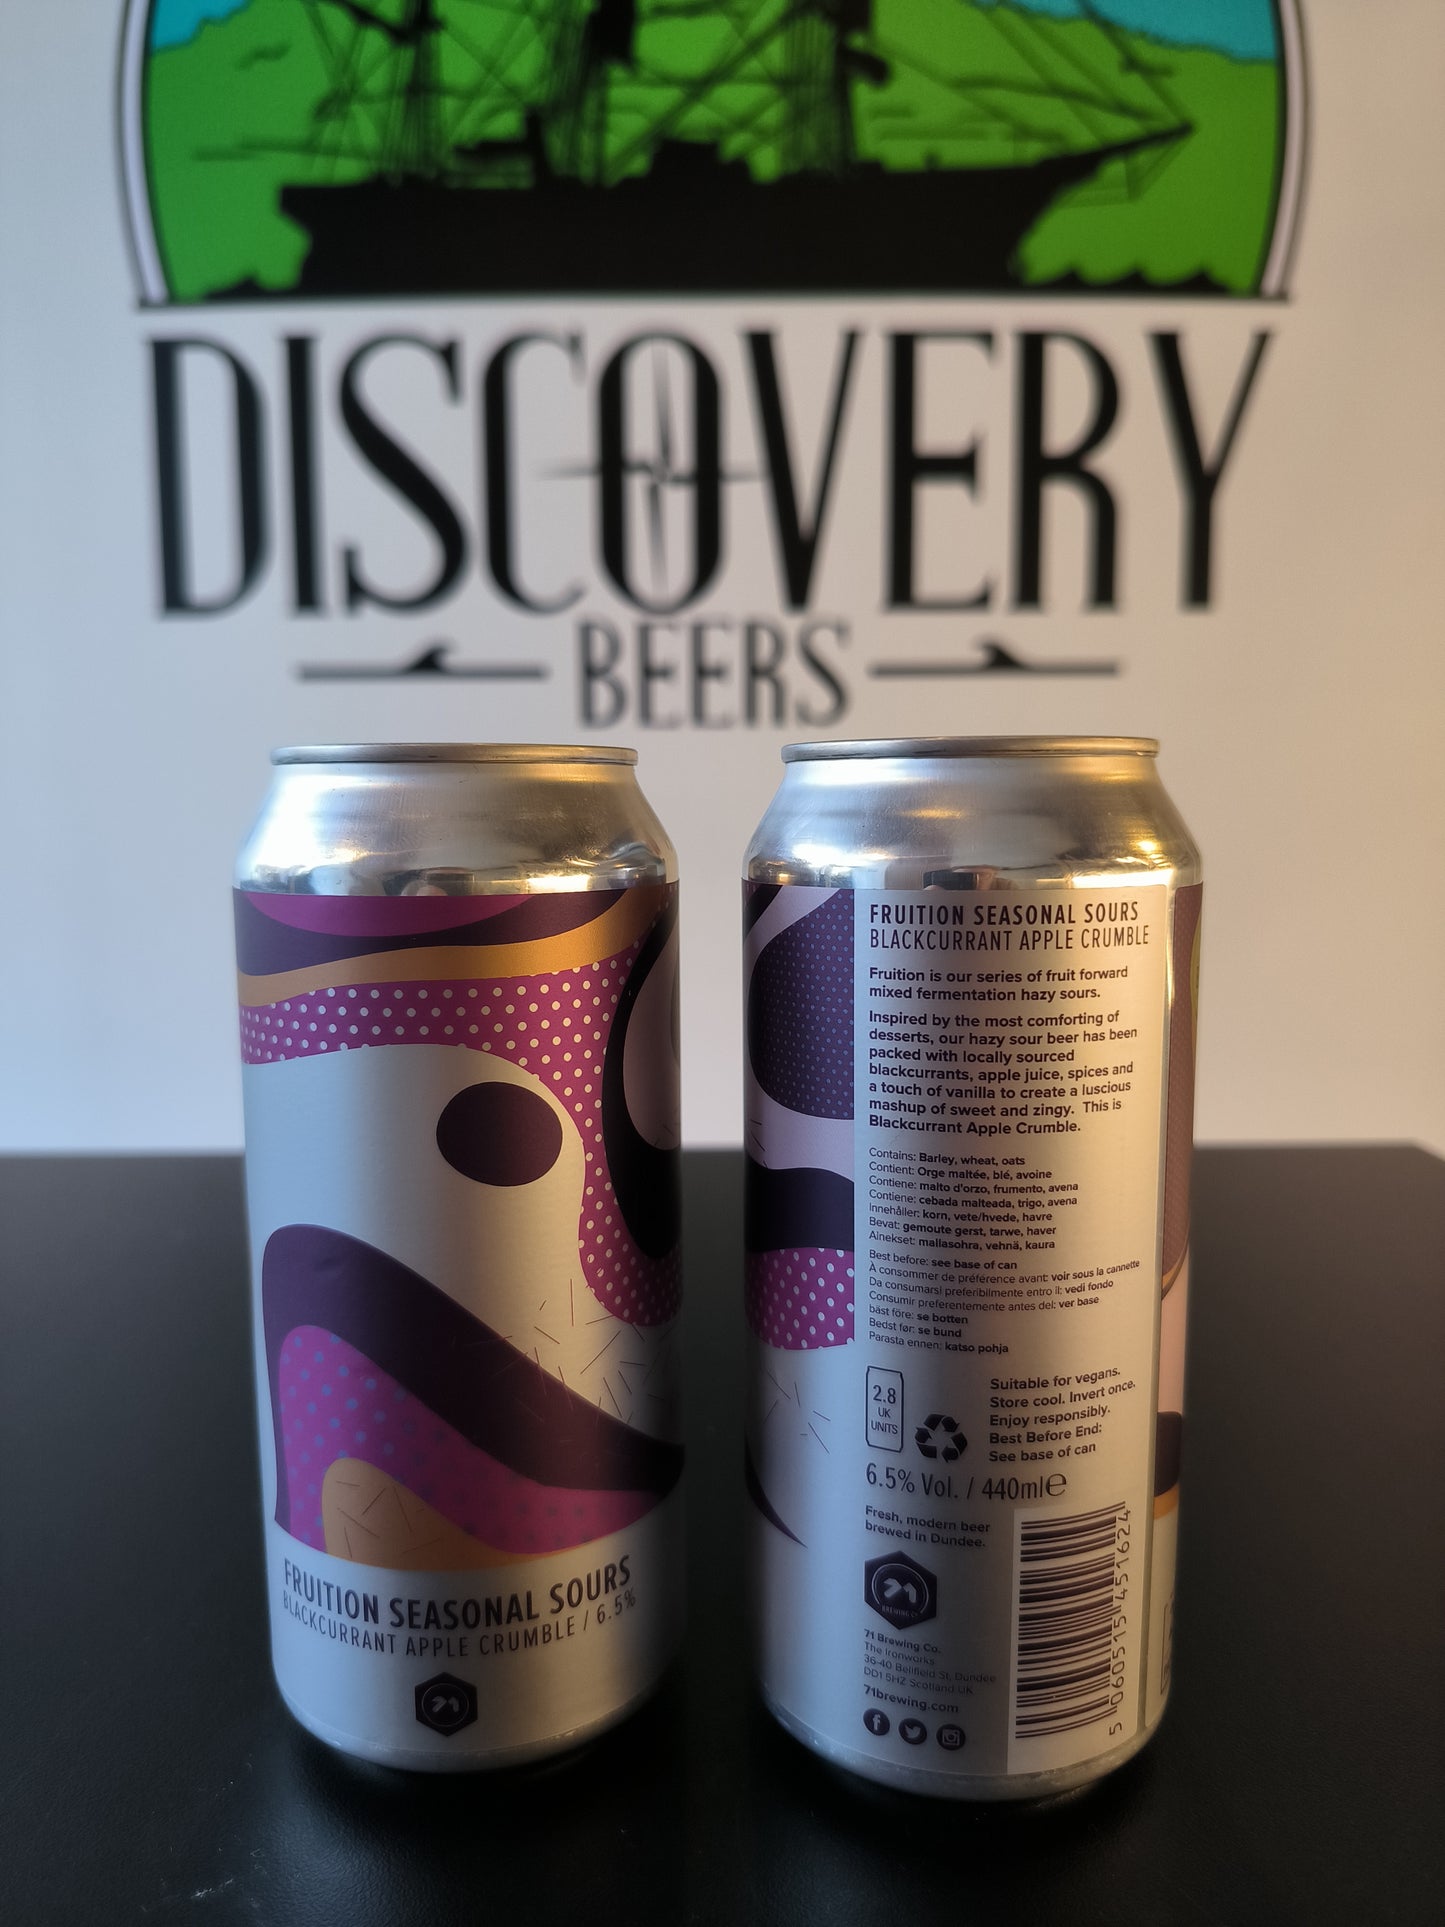 71 Brewing - Fruition - Blackcurrant Apple Crumble